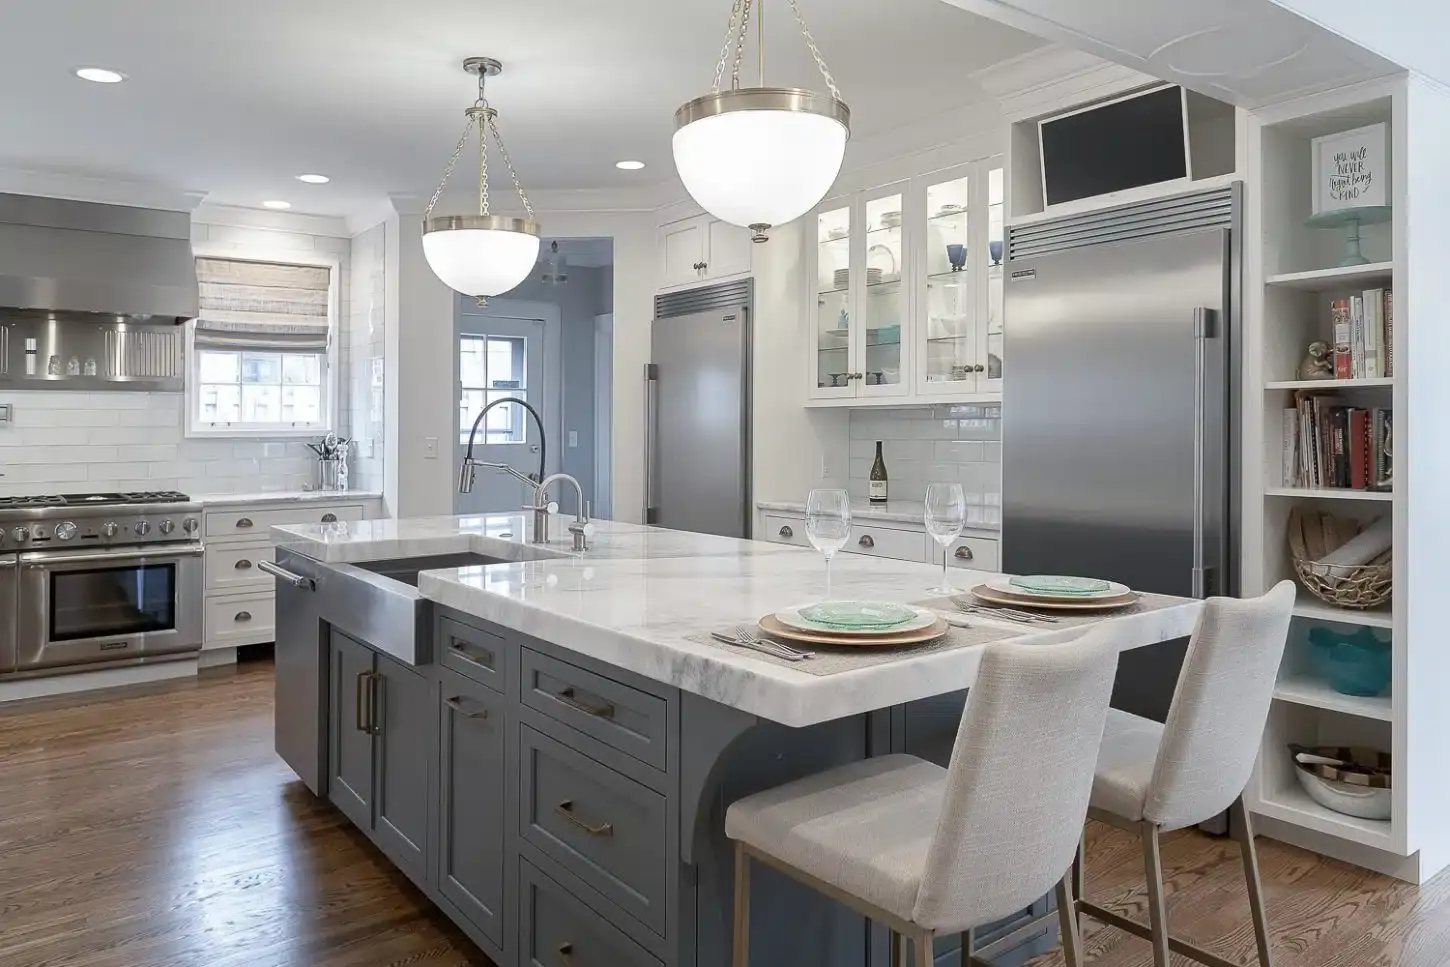 Chagrin-River-Company-Kitchen-Remodel-Grey-Cabinet-Island-Shaker-Heights-Ohio